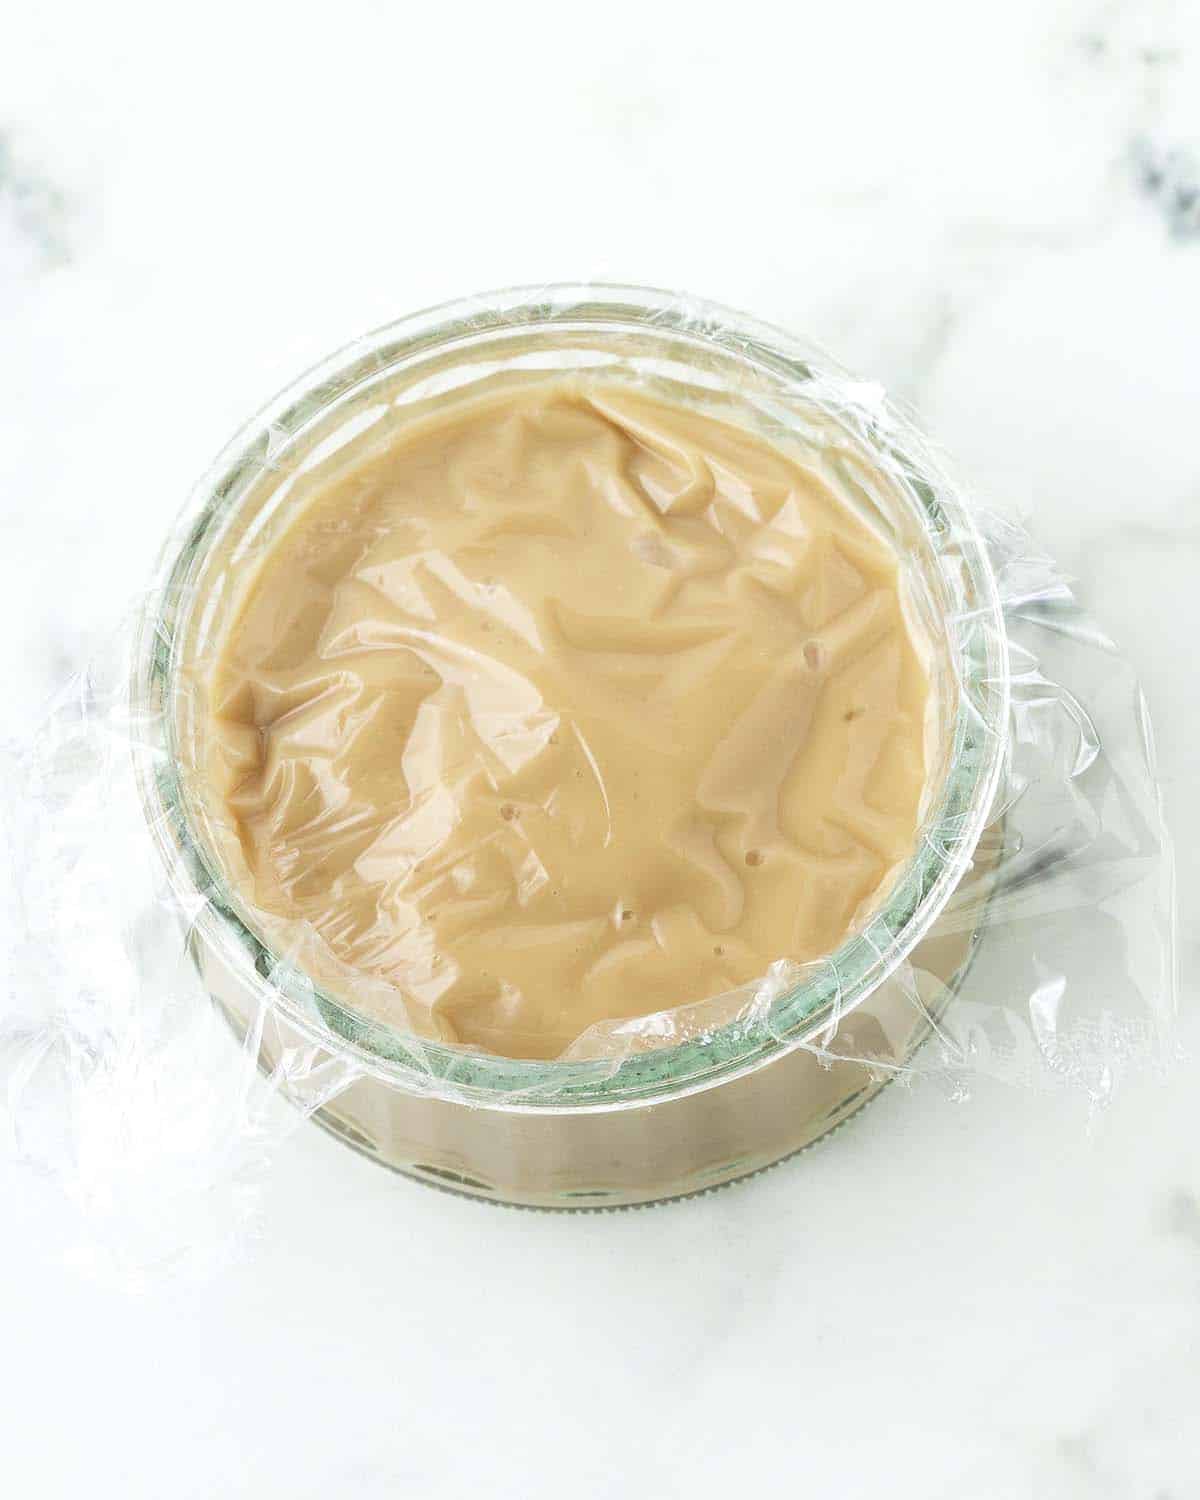 An overhead image of a small glass bowl filled with butterscotch pudding and covered in plastic wrap.